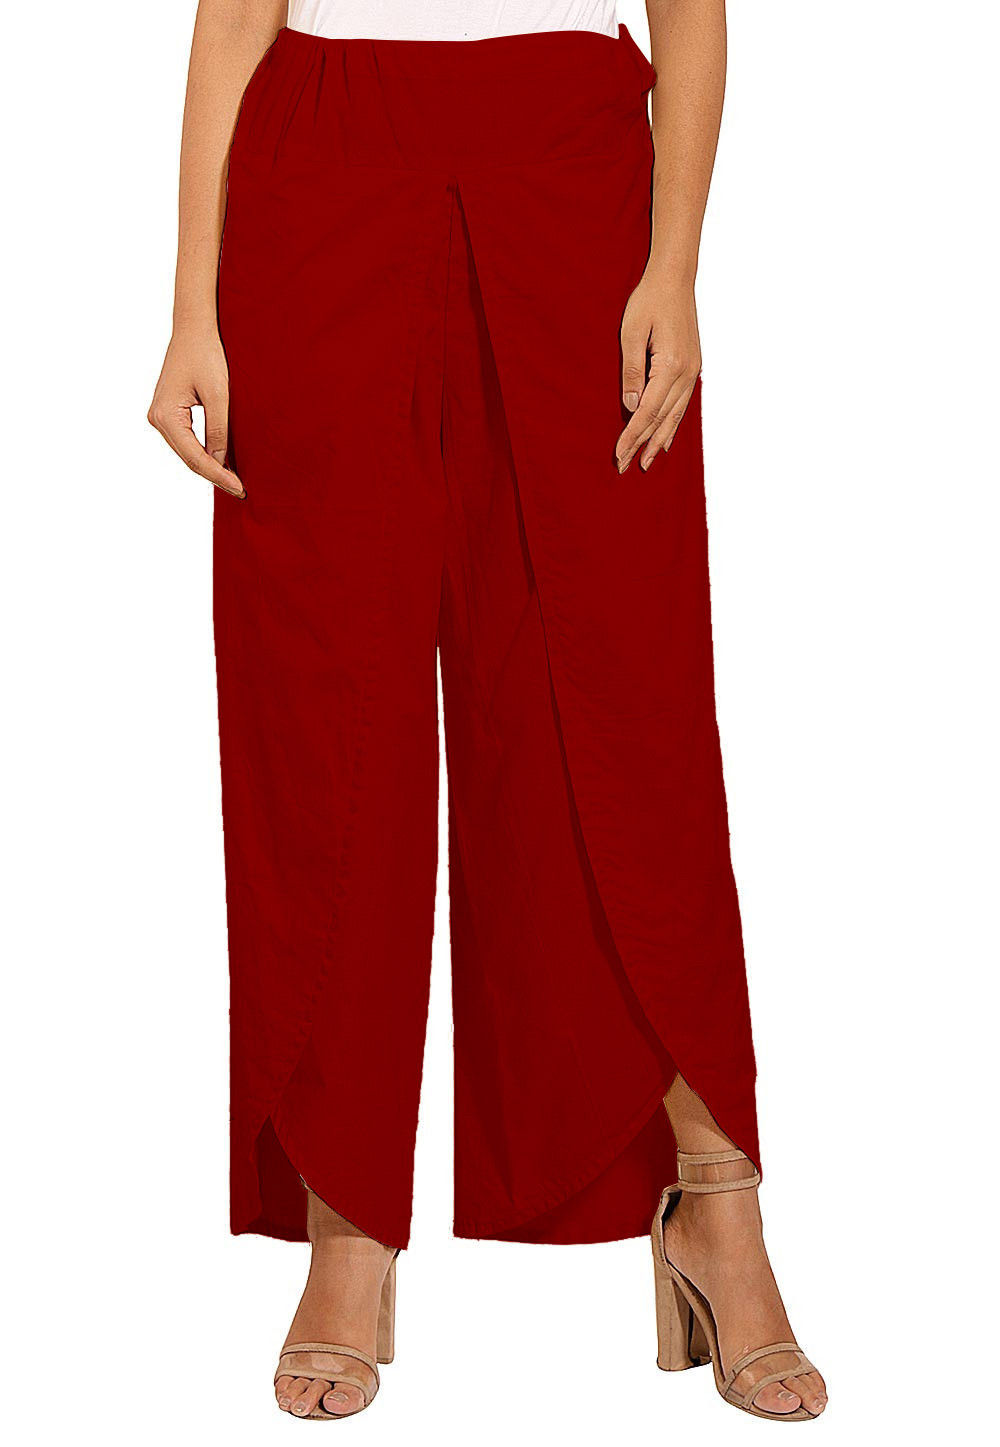 Solid Color Cotton Tulip Pant in Red : BJG194